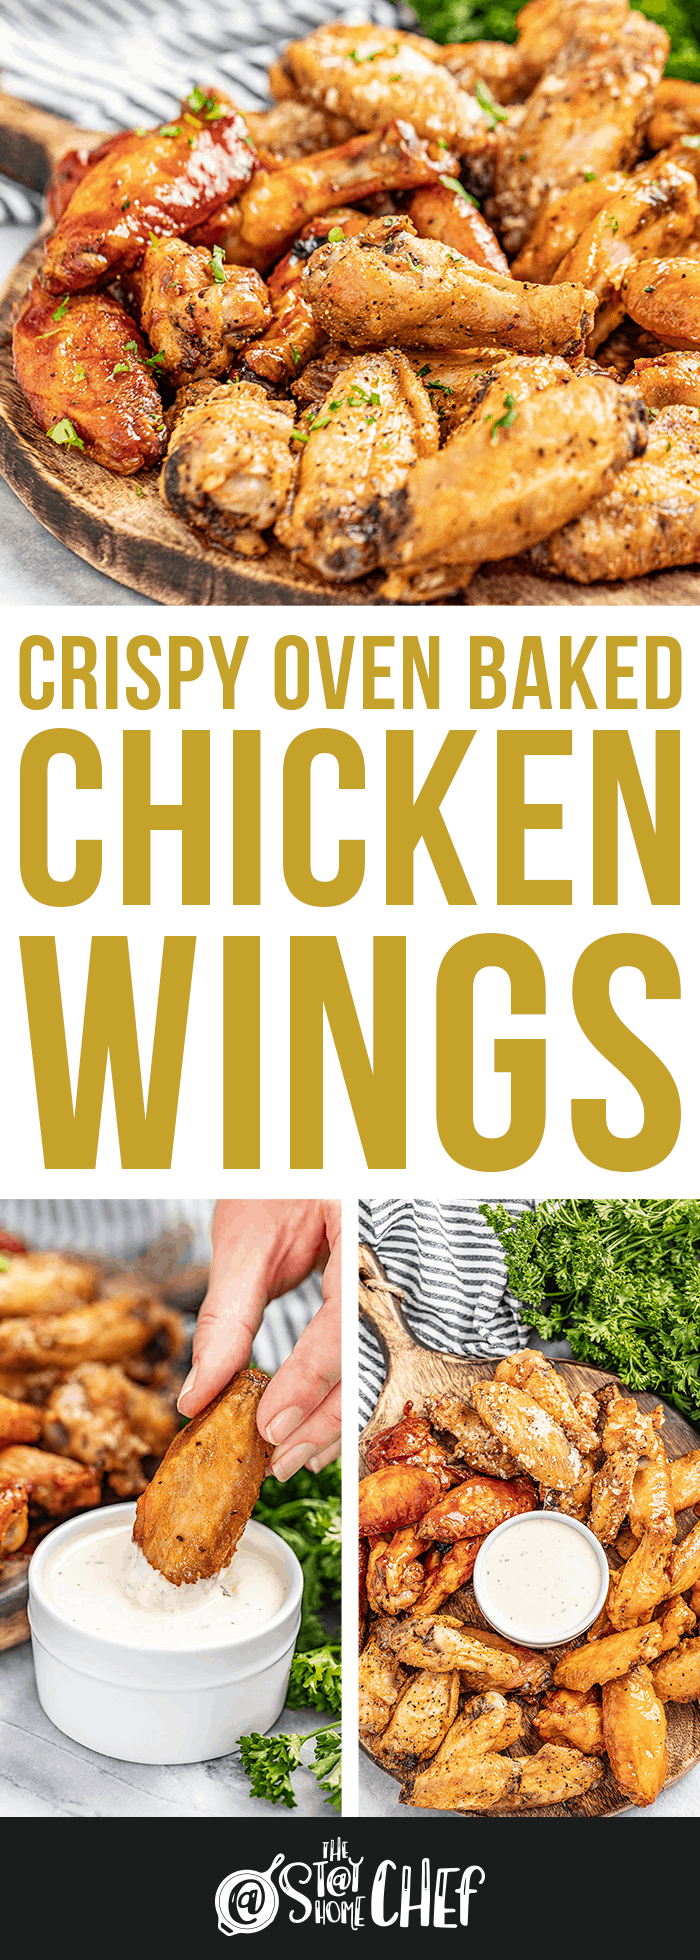 Crispy Oven Baked Chicken Wings (any flavor!)